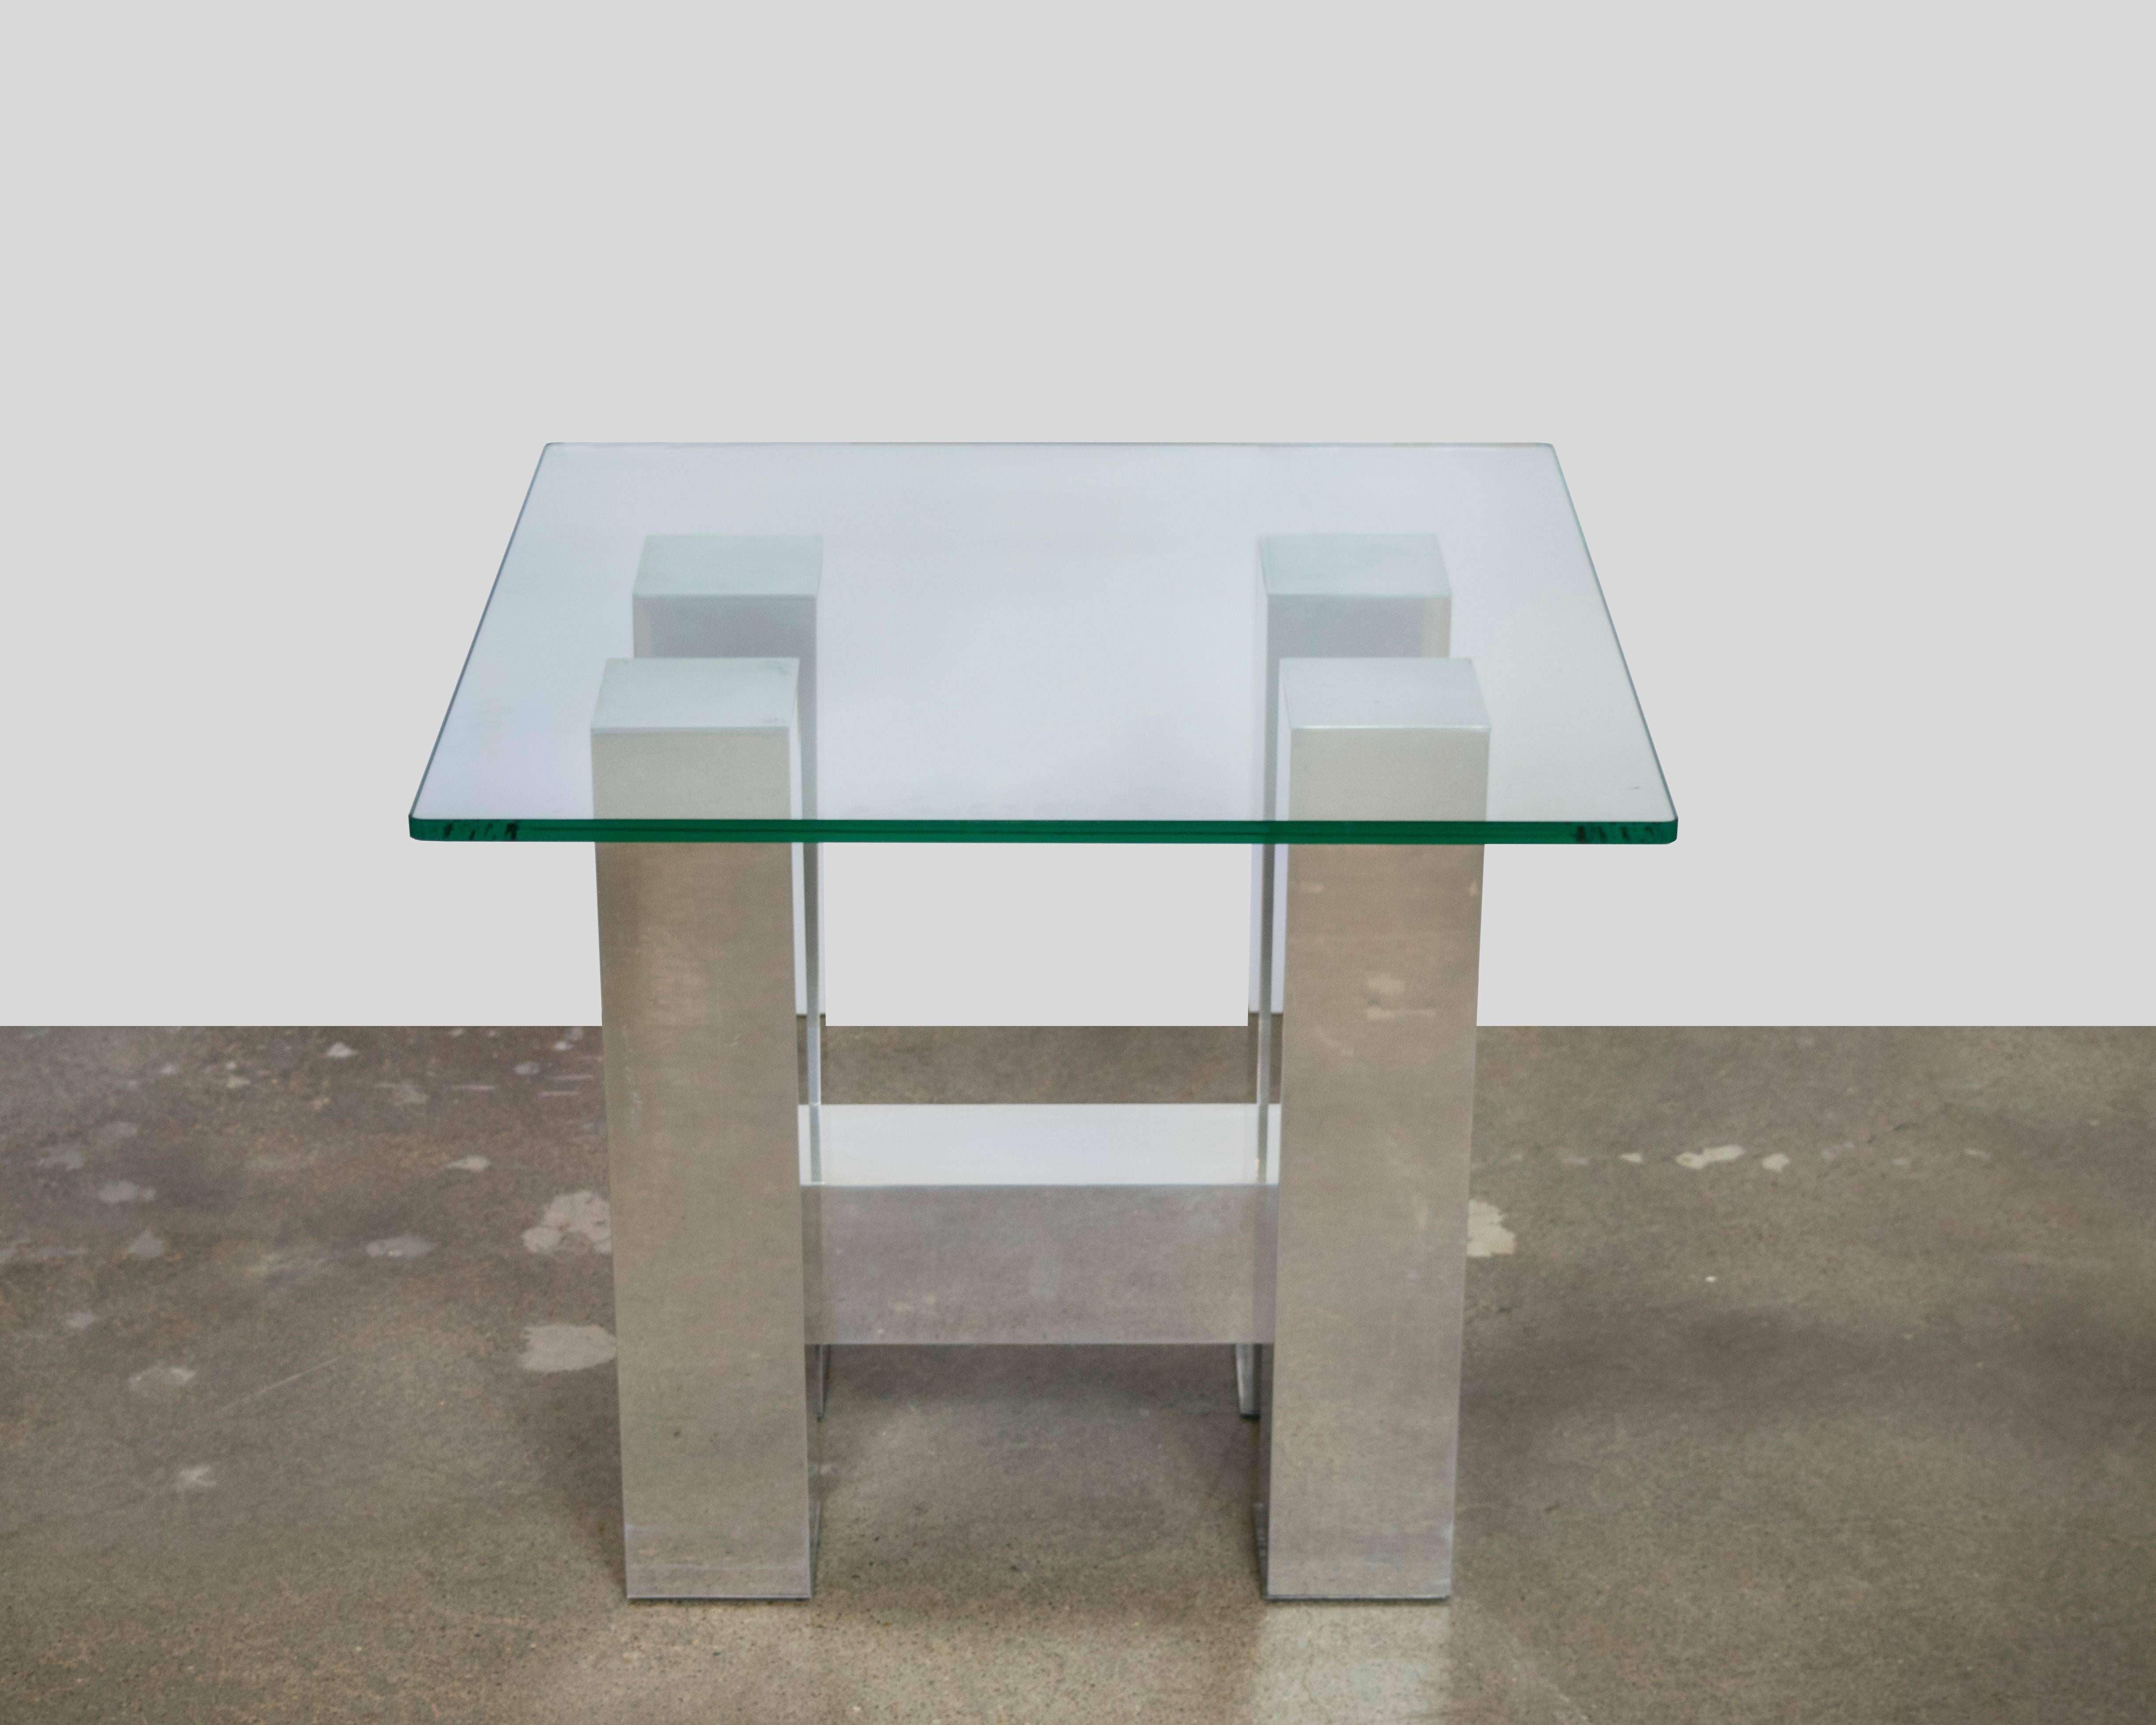 Manufactured by Directional Furniture, this brushed aluminum side table resembles the cityscape series for which Paul Evans is renowned for. Beautifully constructed and highly sculptural. Original client purchased from Directional Furniture showroom